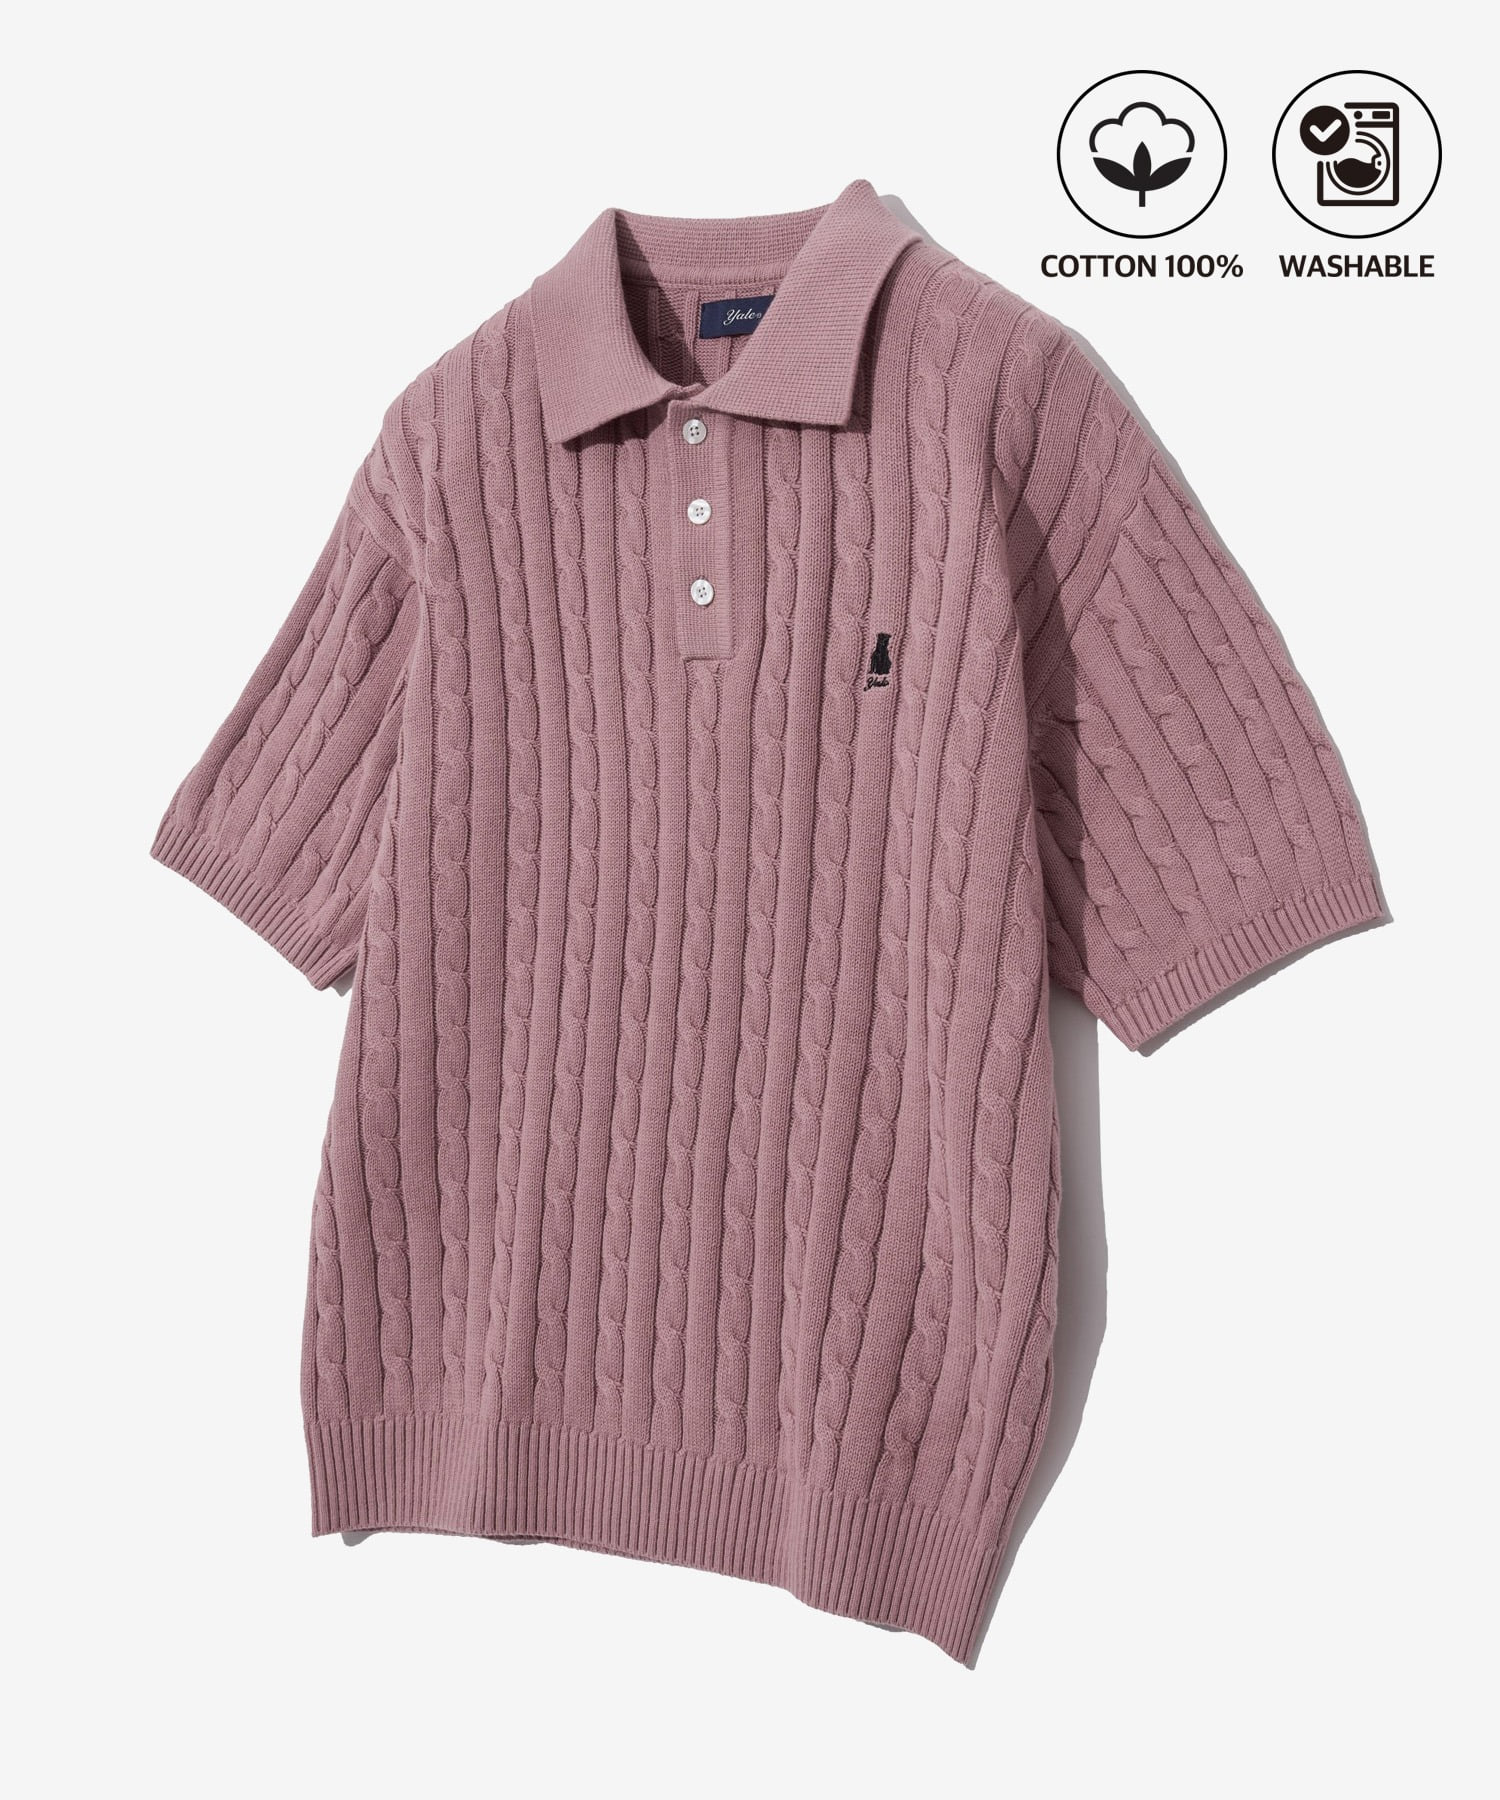 HERITAGE DAN CABLE SHORT-SLEEVE POLO KNIT VTG PINK